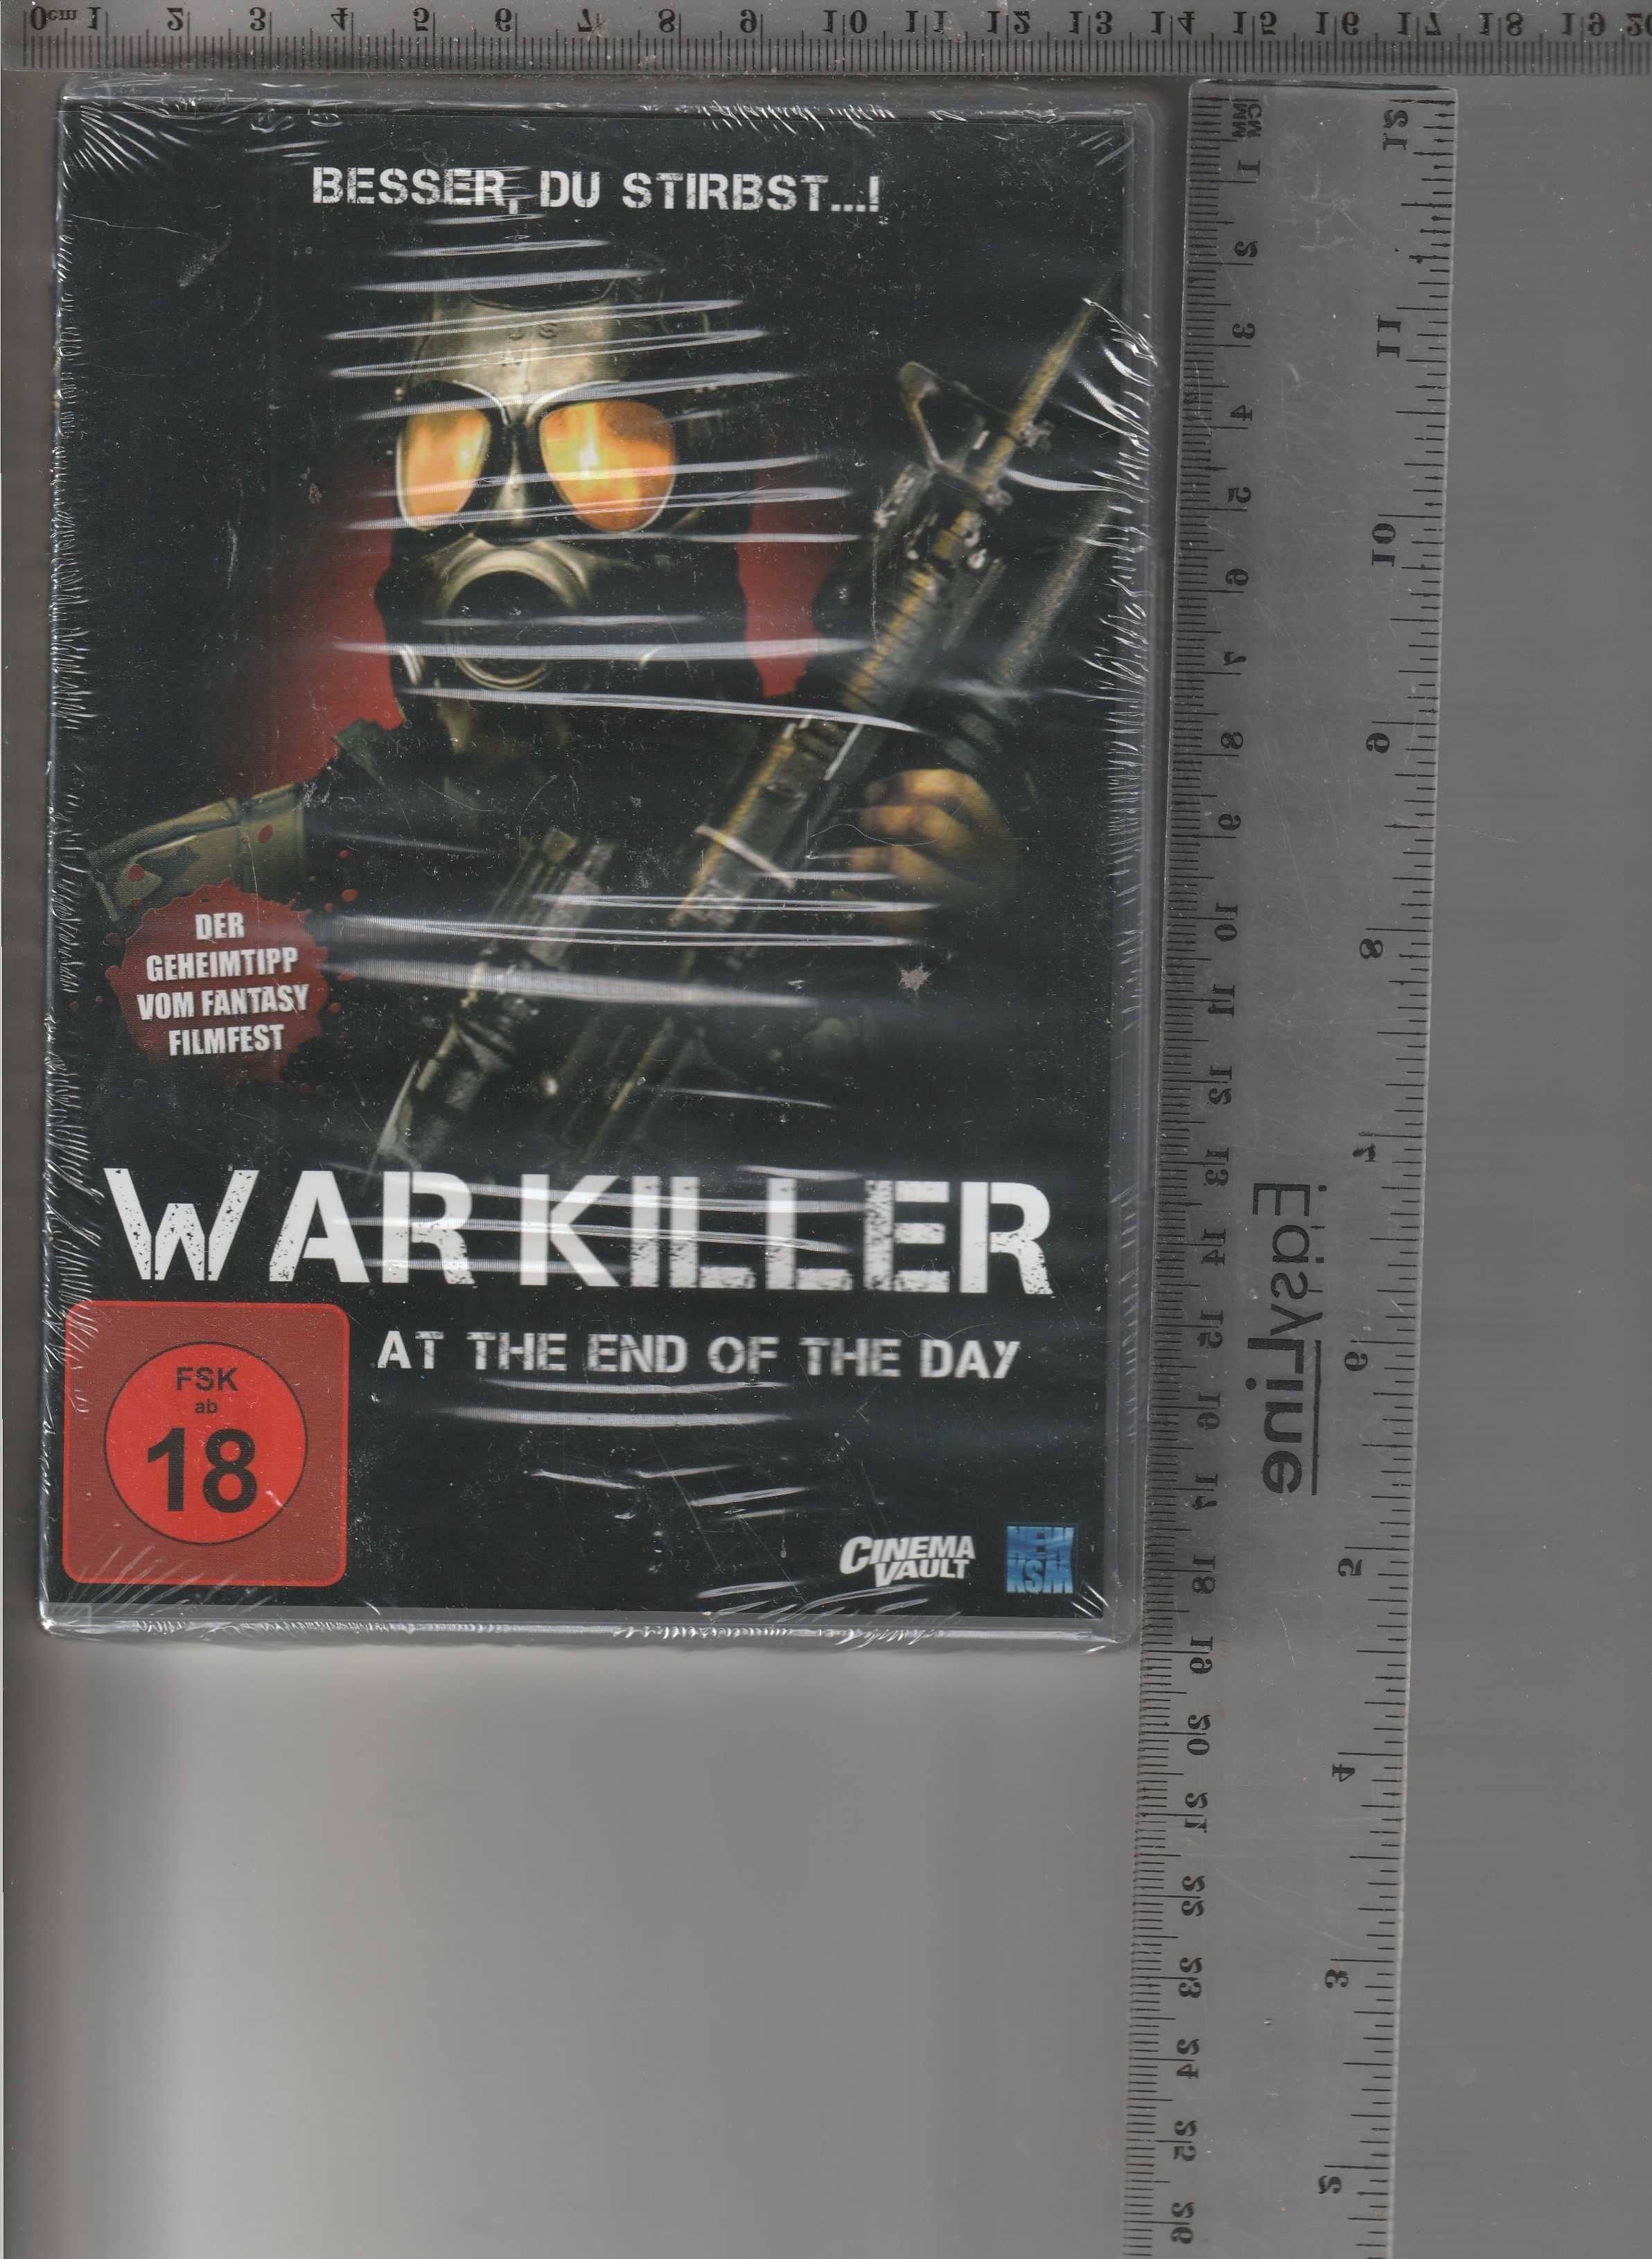 War killer at the end of the day DVD